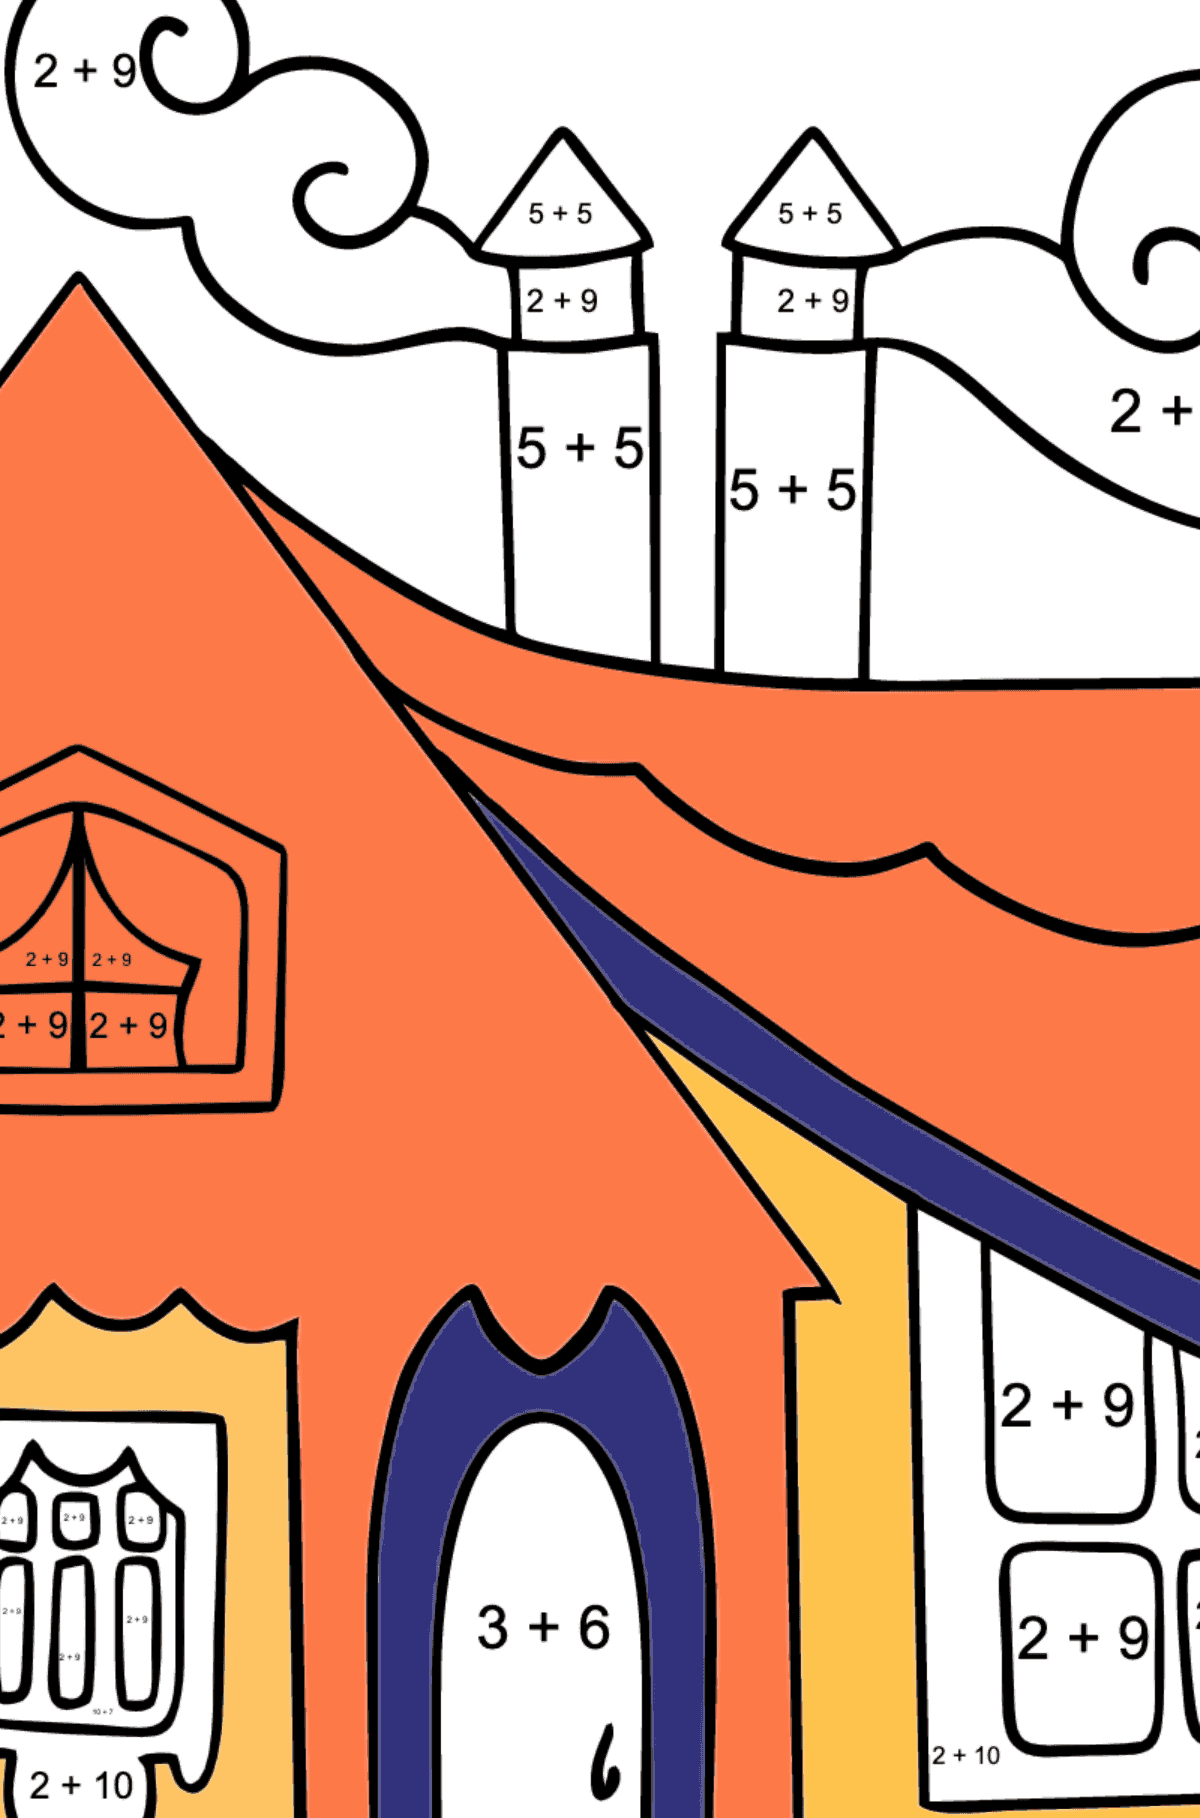 Tiny House Coloring Page (Easy) - Math Coloring - Addition for Kids